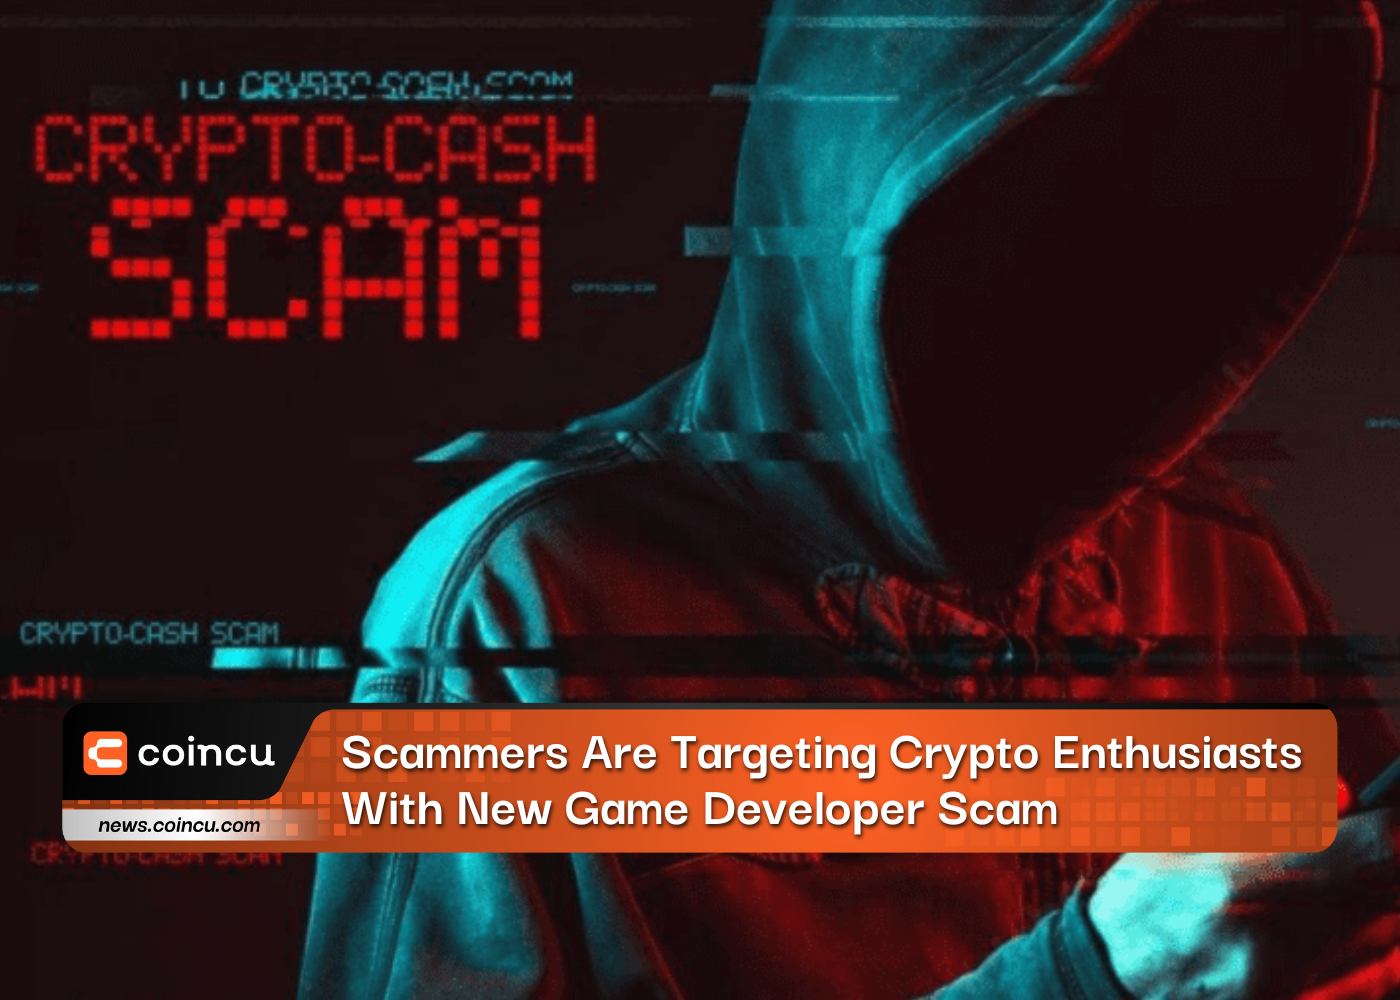 Scammers Are Targeting Crypto Enthusiasts With New Game Developer Scam